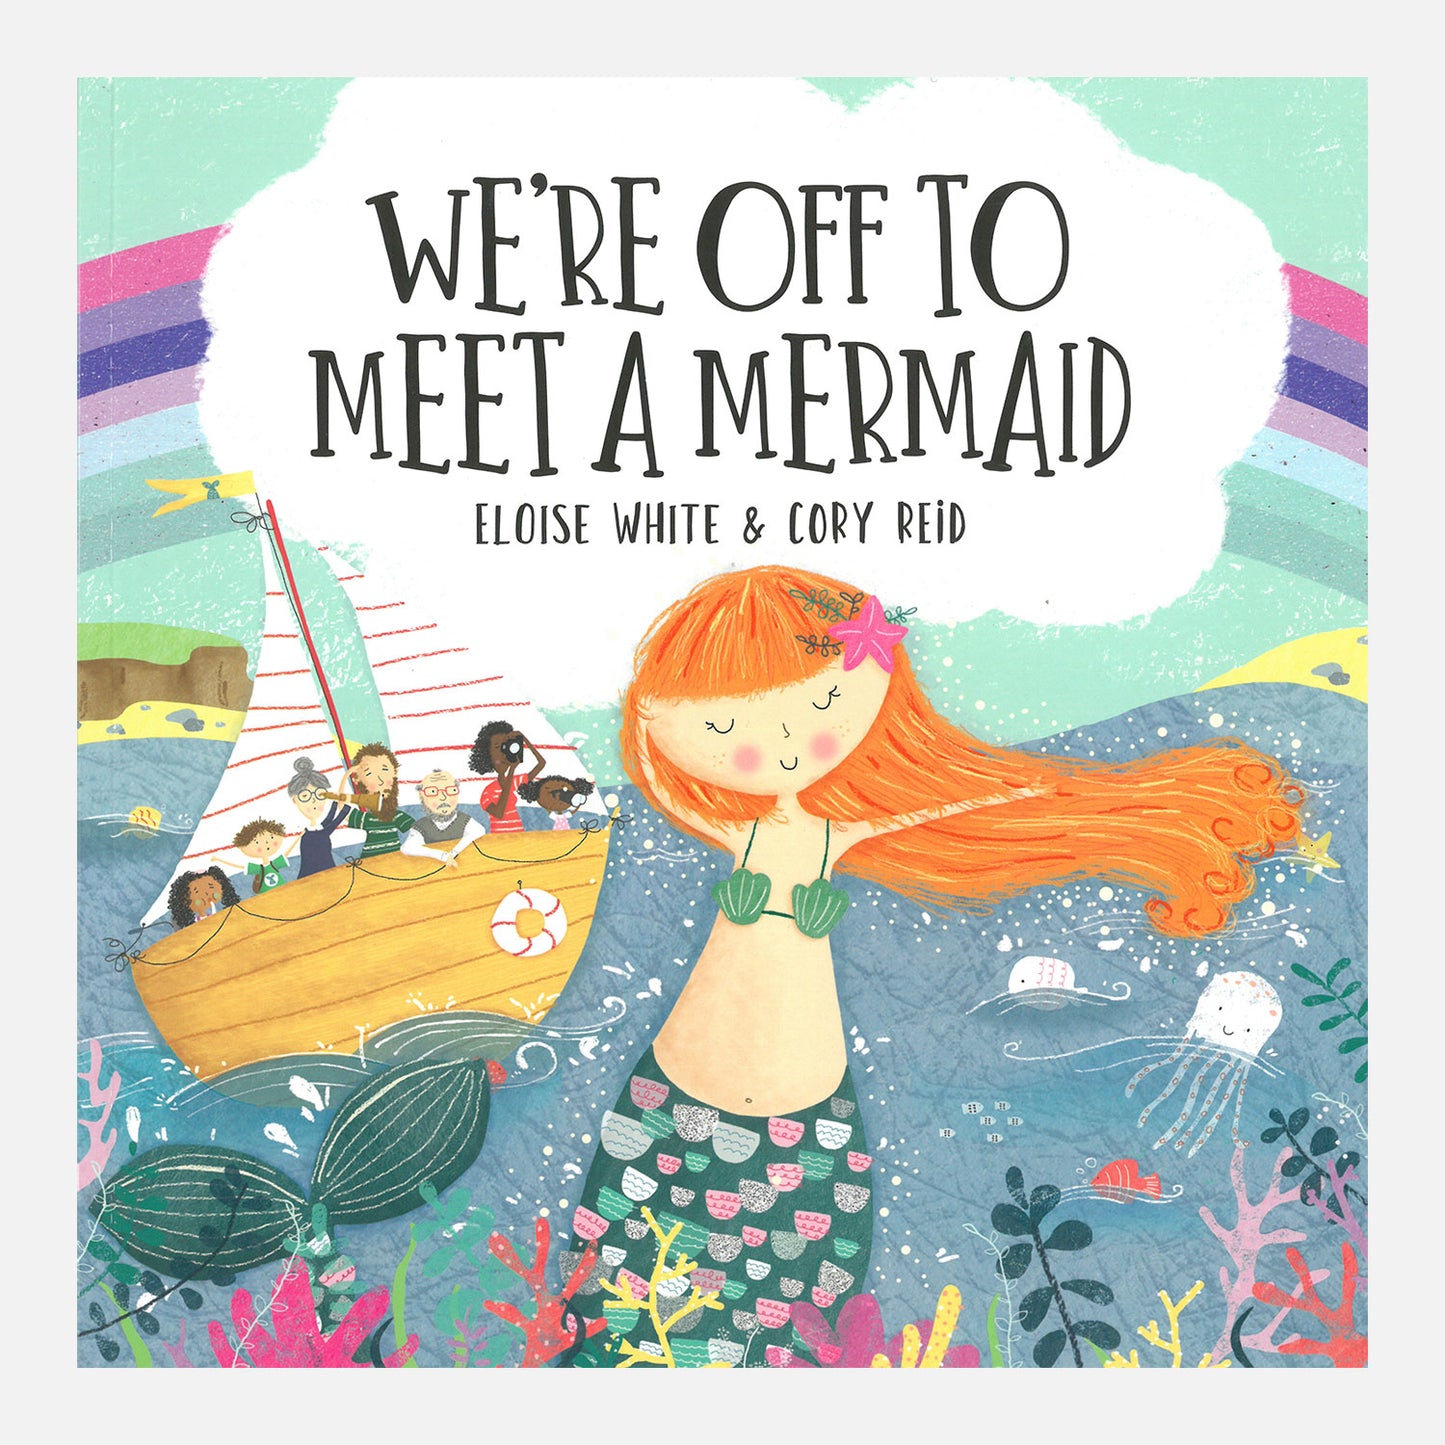 We're off to meet a mermaid book with drawing of a mermaid in the sea with a boat full of people in the background